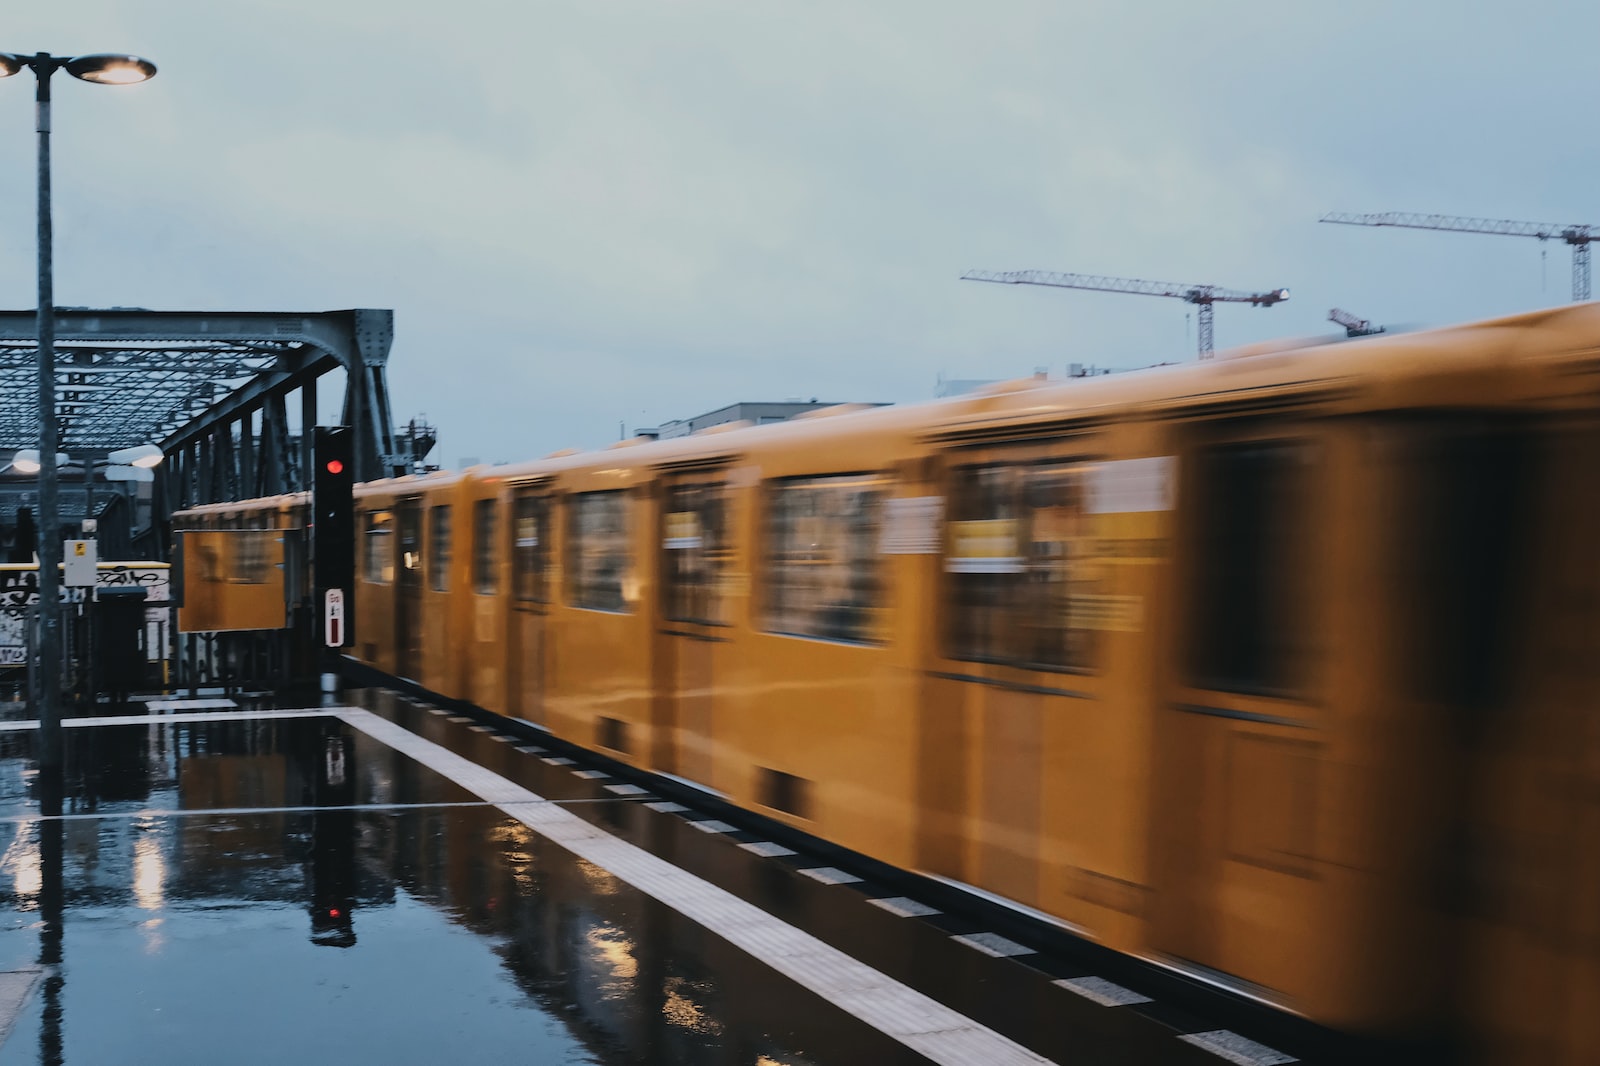 Blurry yellow ubahn moving outside under a grey sky